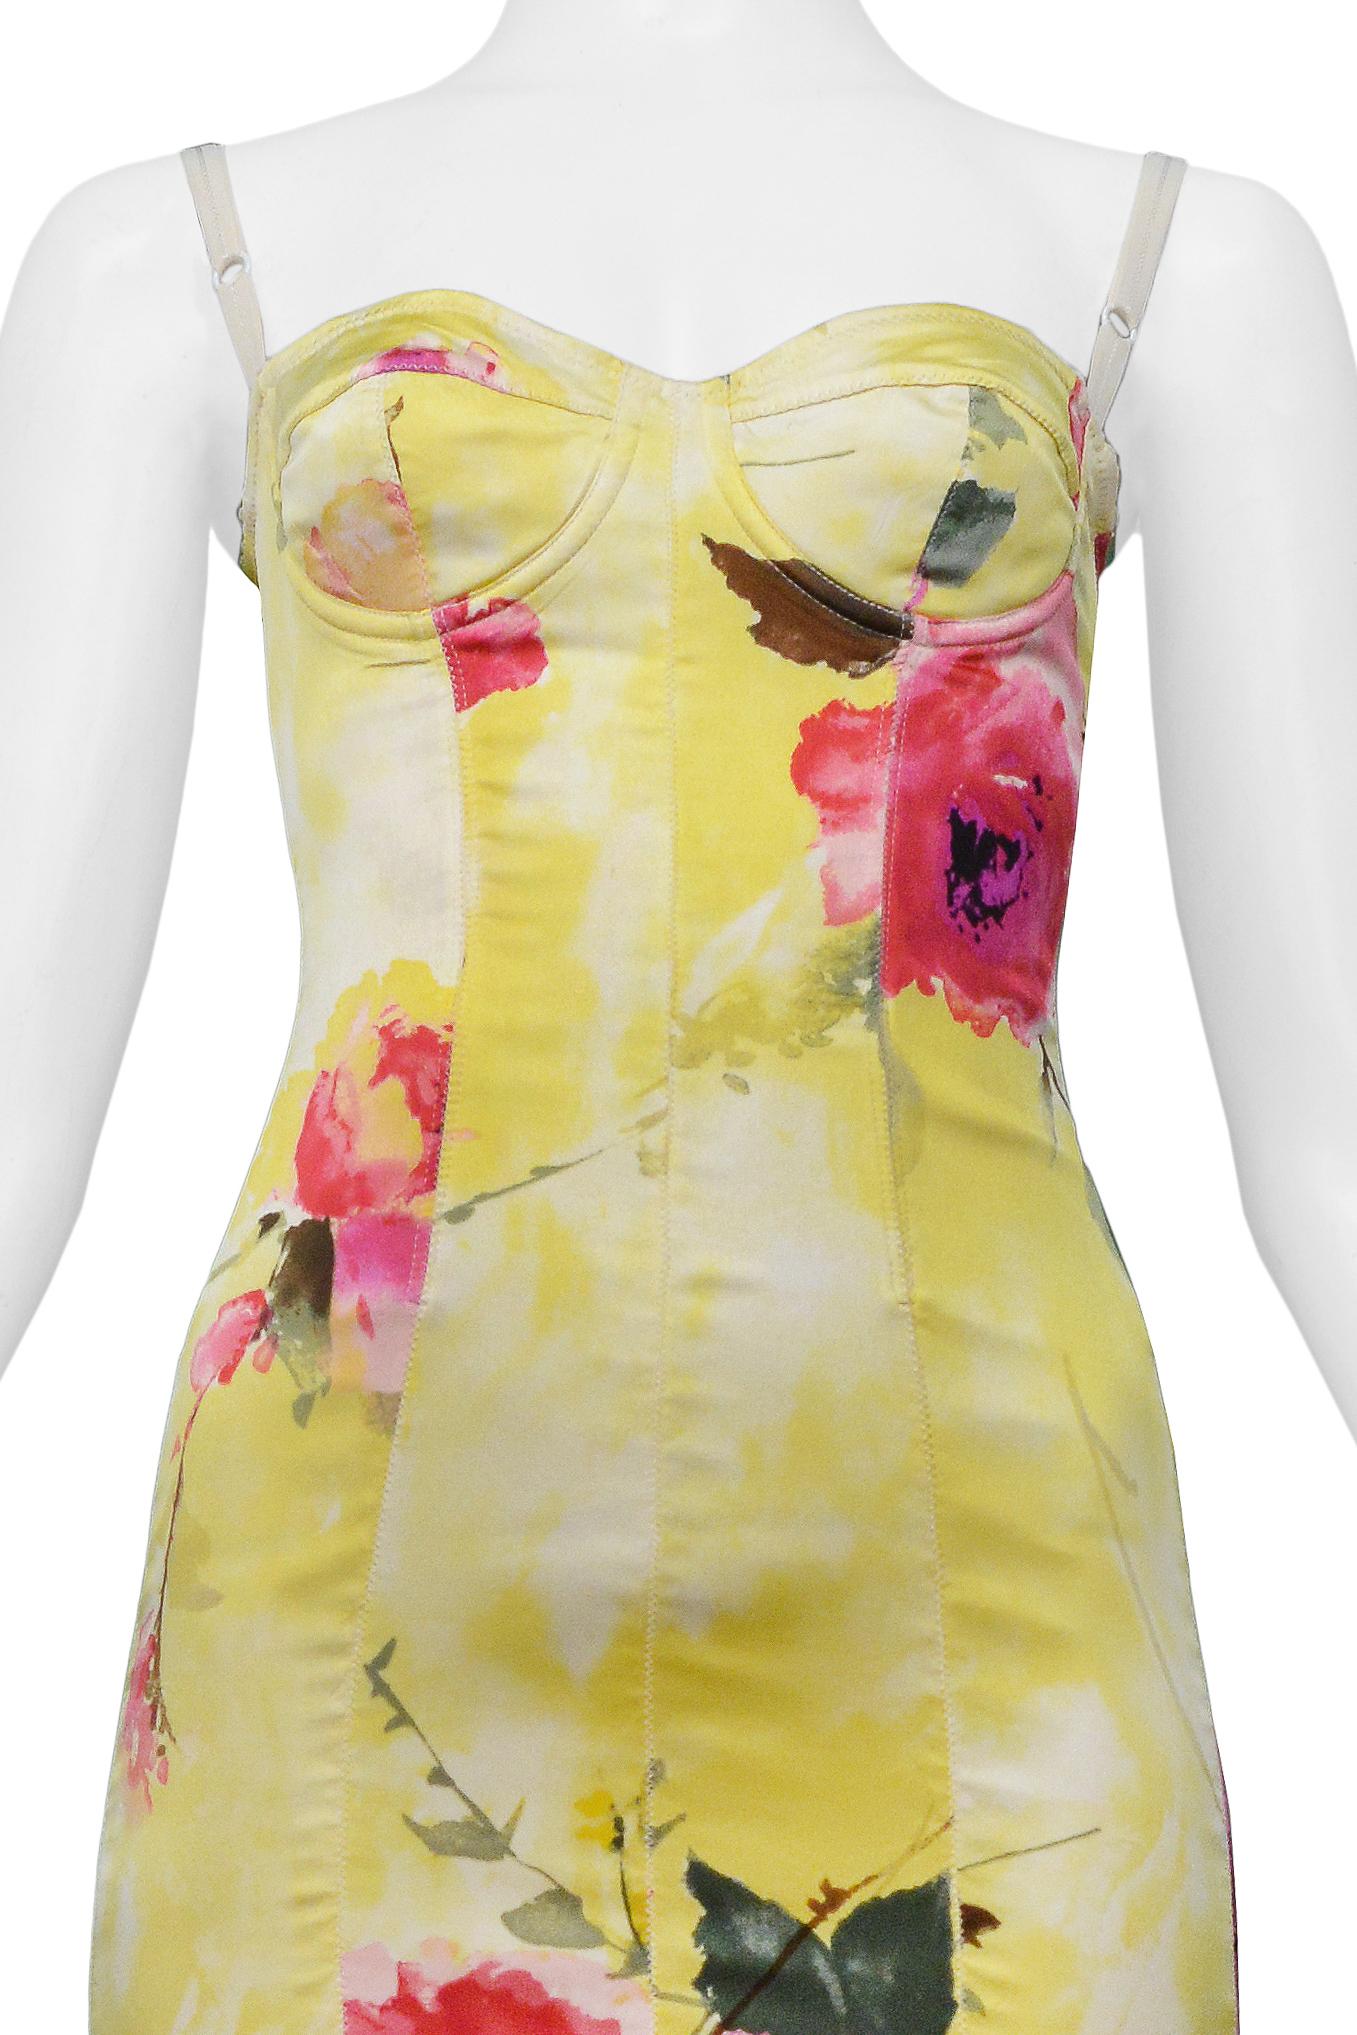 dolce and gabbana yellow floral dress